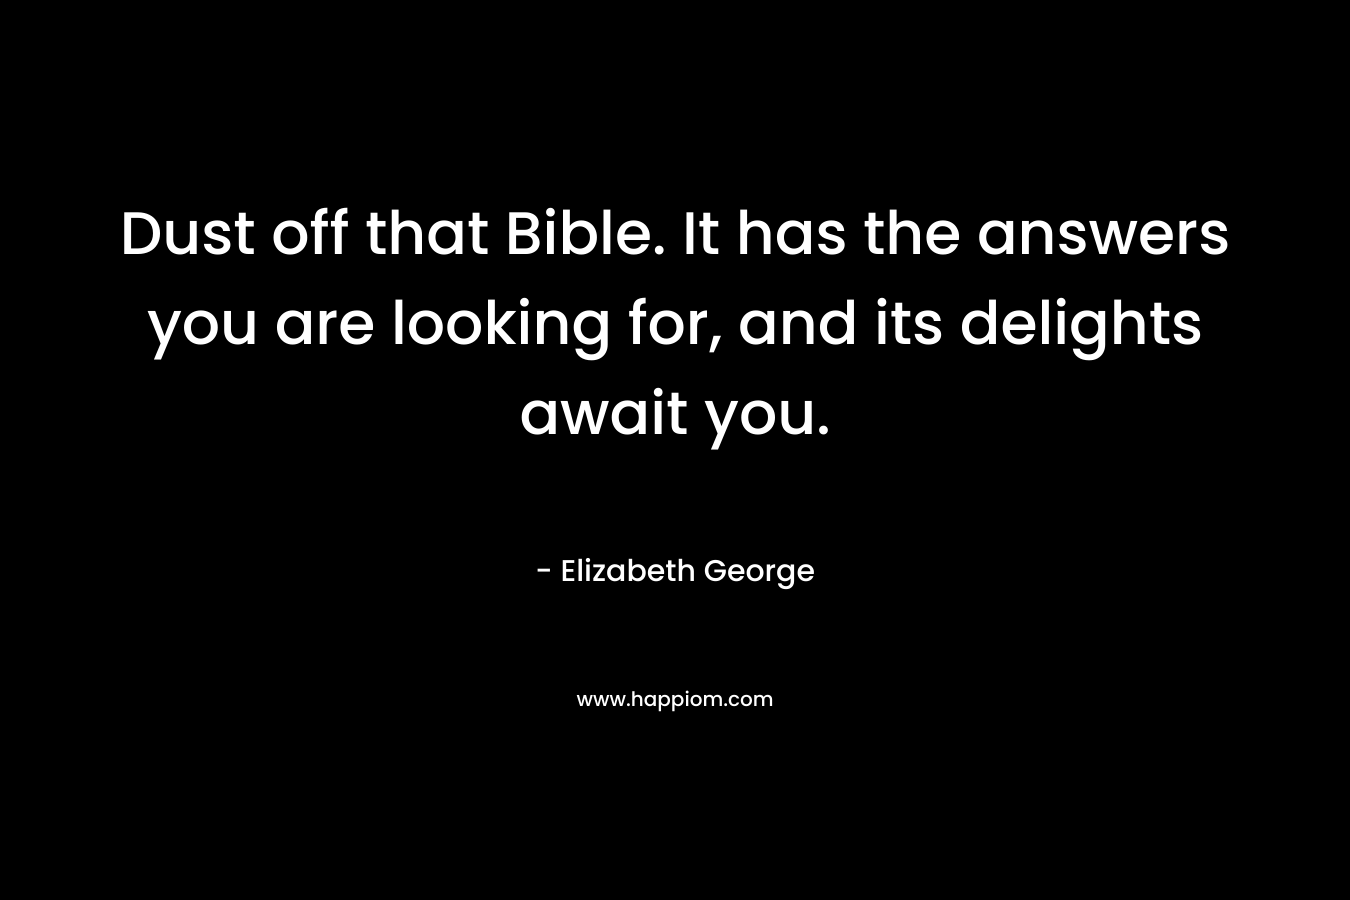 Dust off that Bible. It has the answers you are looking for, and its delights await you.